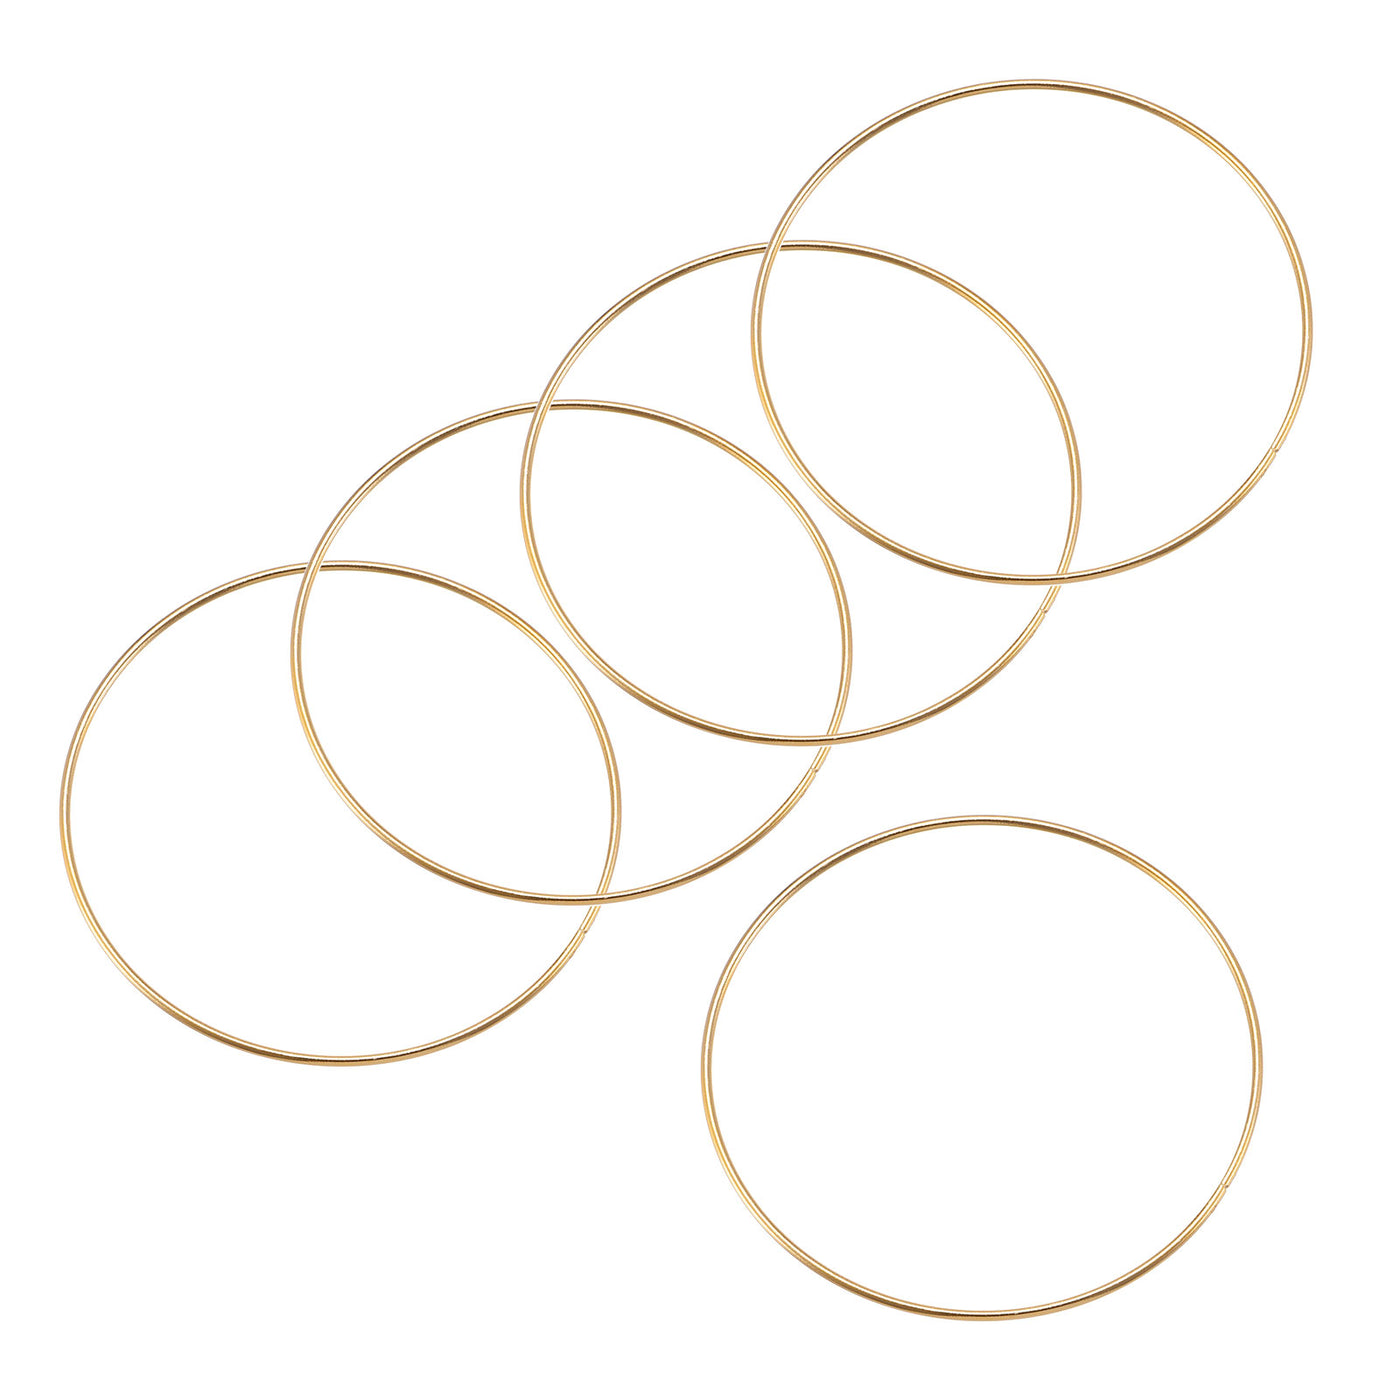 uxcell Uxcell 130mm(5.12") OD Metal O Ring Non-Welded Craft Hoops for DIY Gold Tone 5pcs